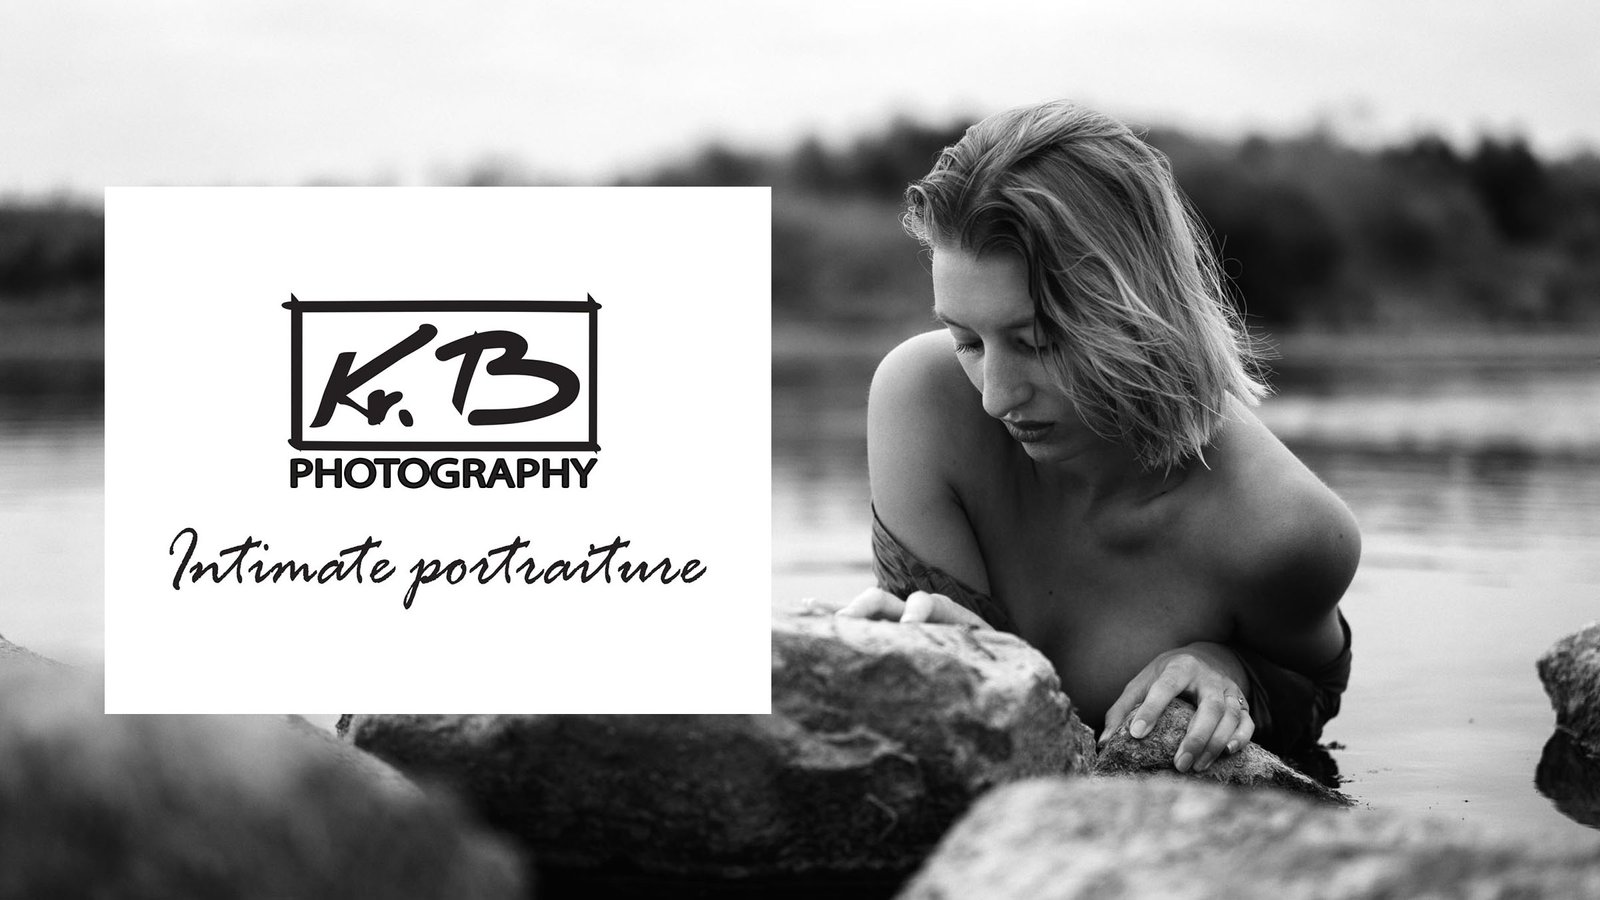 KrB Photography, cover photo 4